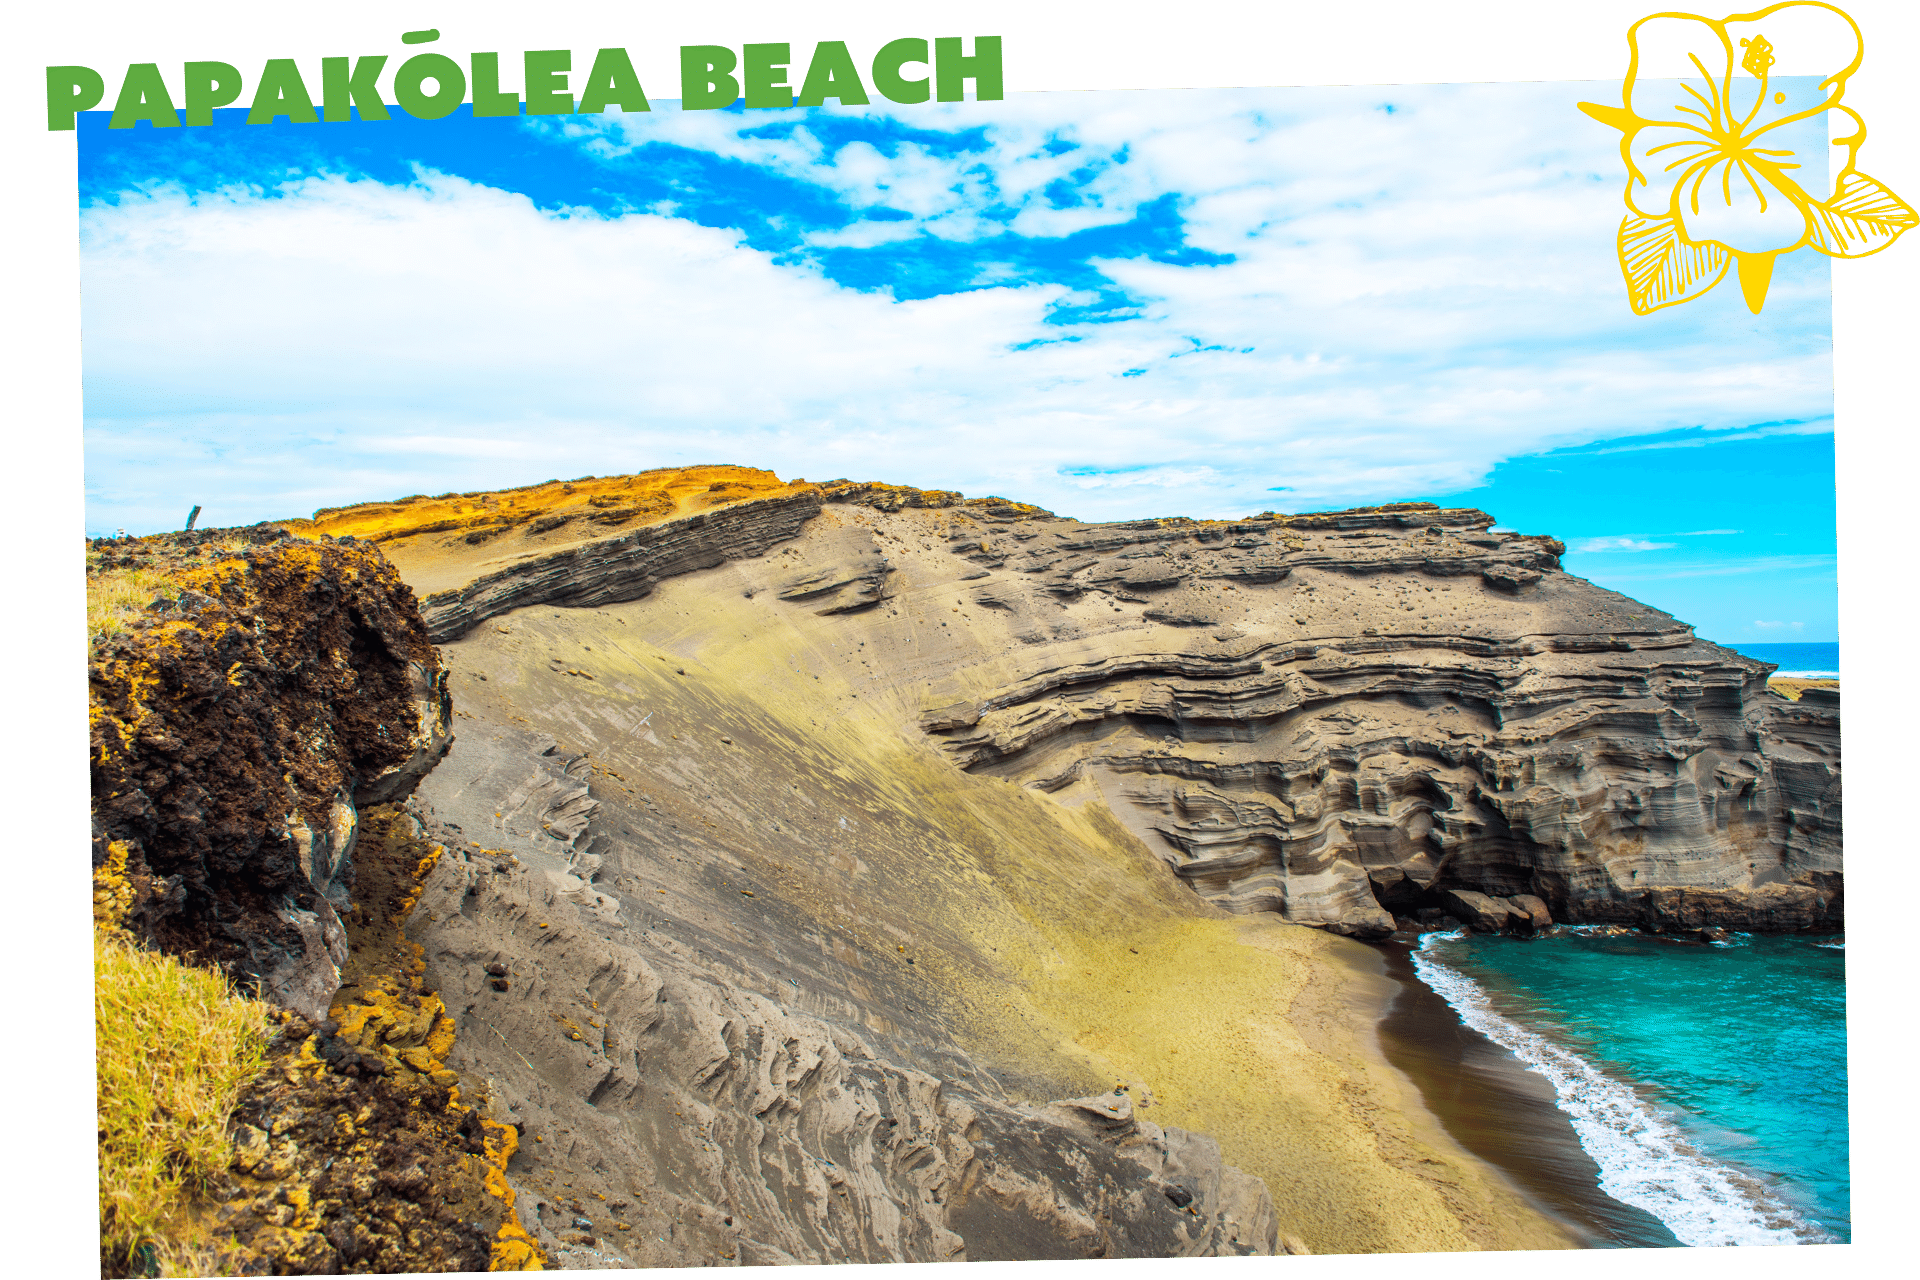 The green sands of Papakolea Beach in Hawaii makes it one of the world's most unique beaches.